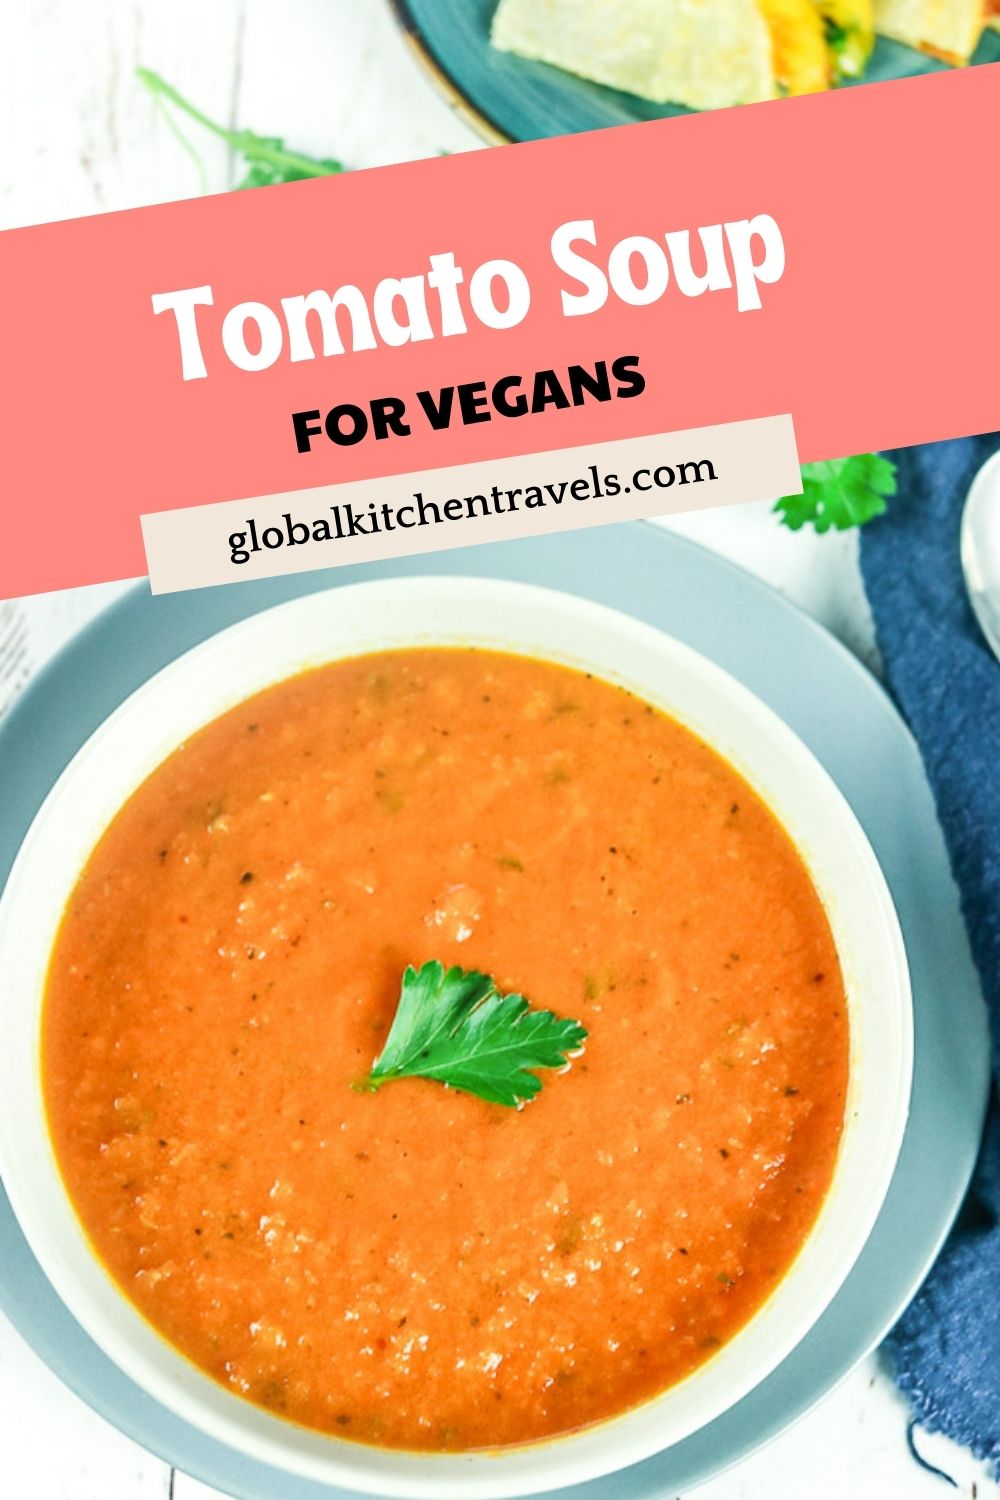 bowl of tomato soup with text